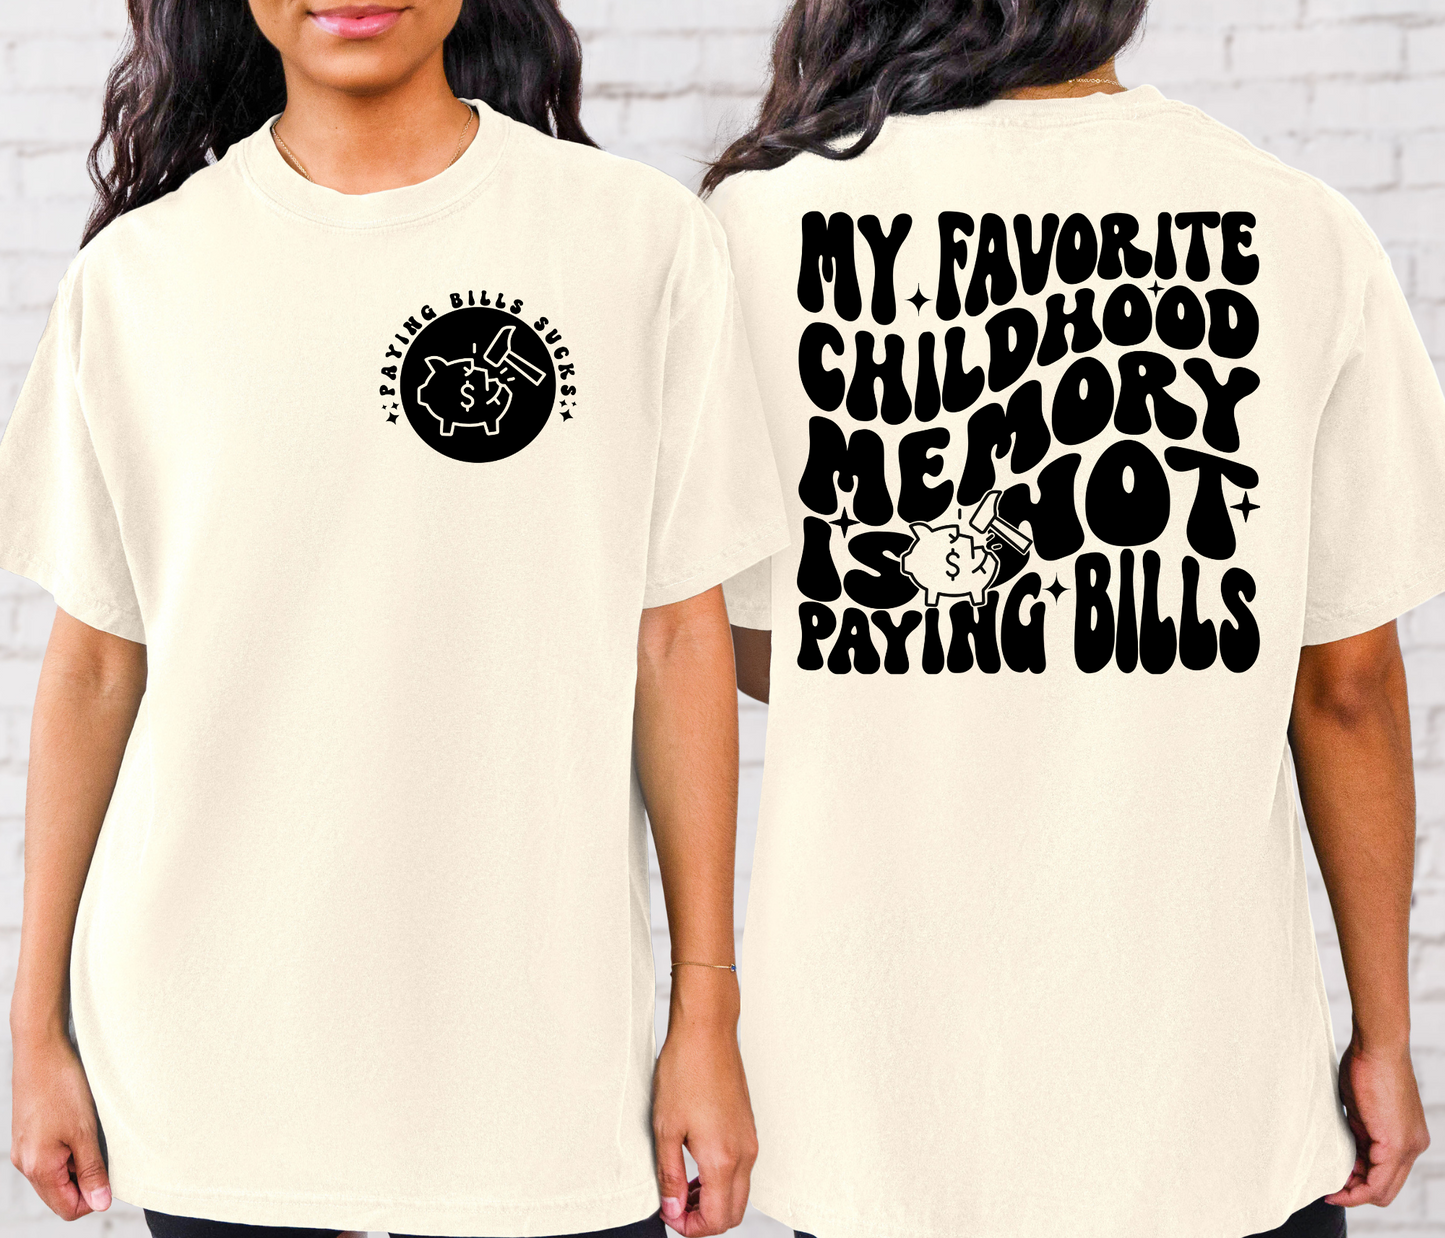 Favorite Childhood memory- not paying bills - Front & Back *Ollie & Co. Exclusive*